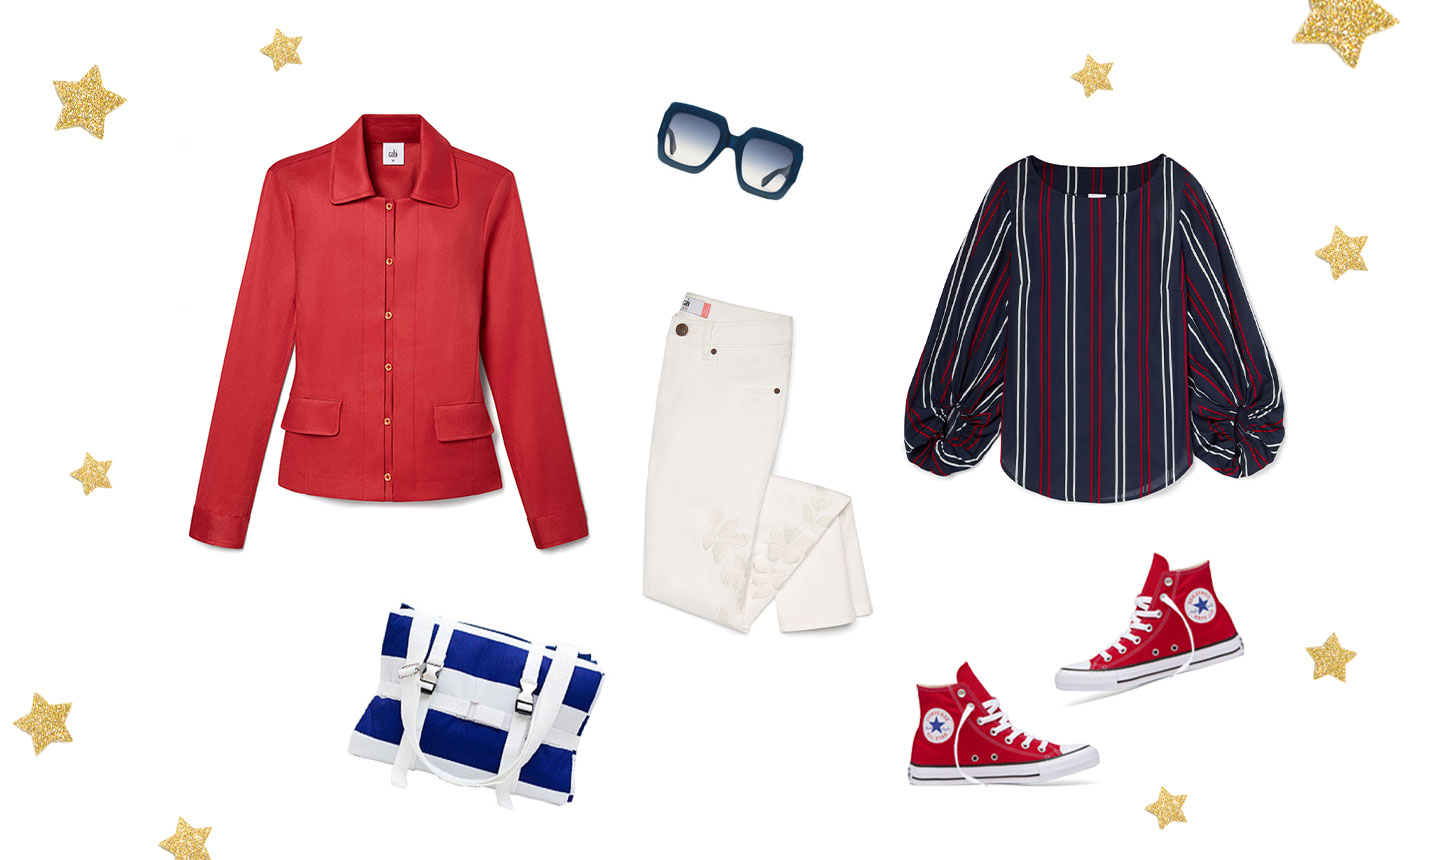 fourth of july outfits that sparkle